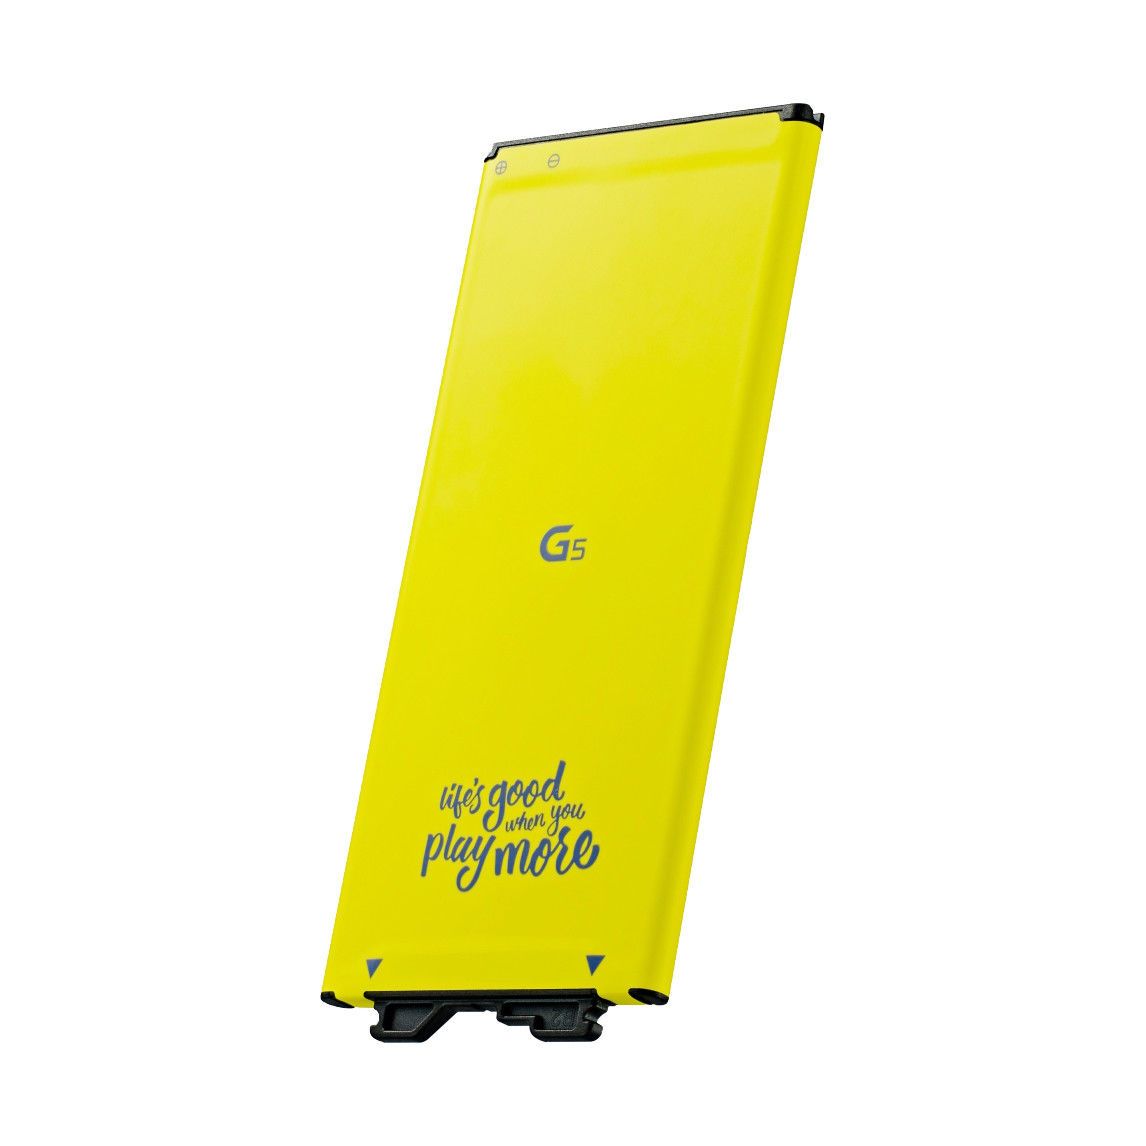 LG G5 - Genuine Replacement Battery for [product_price] - First Help Tech